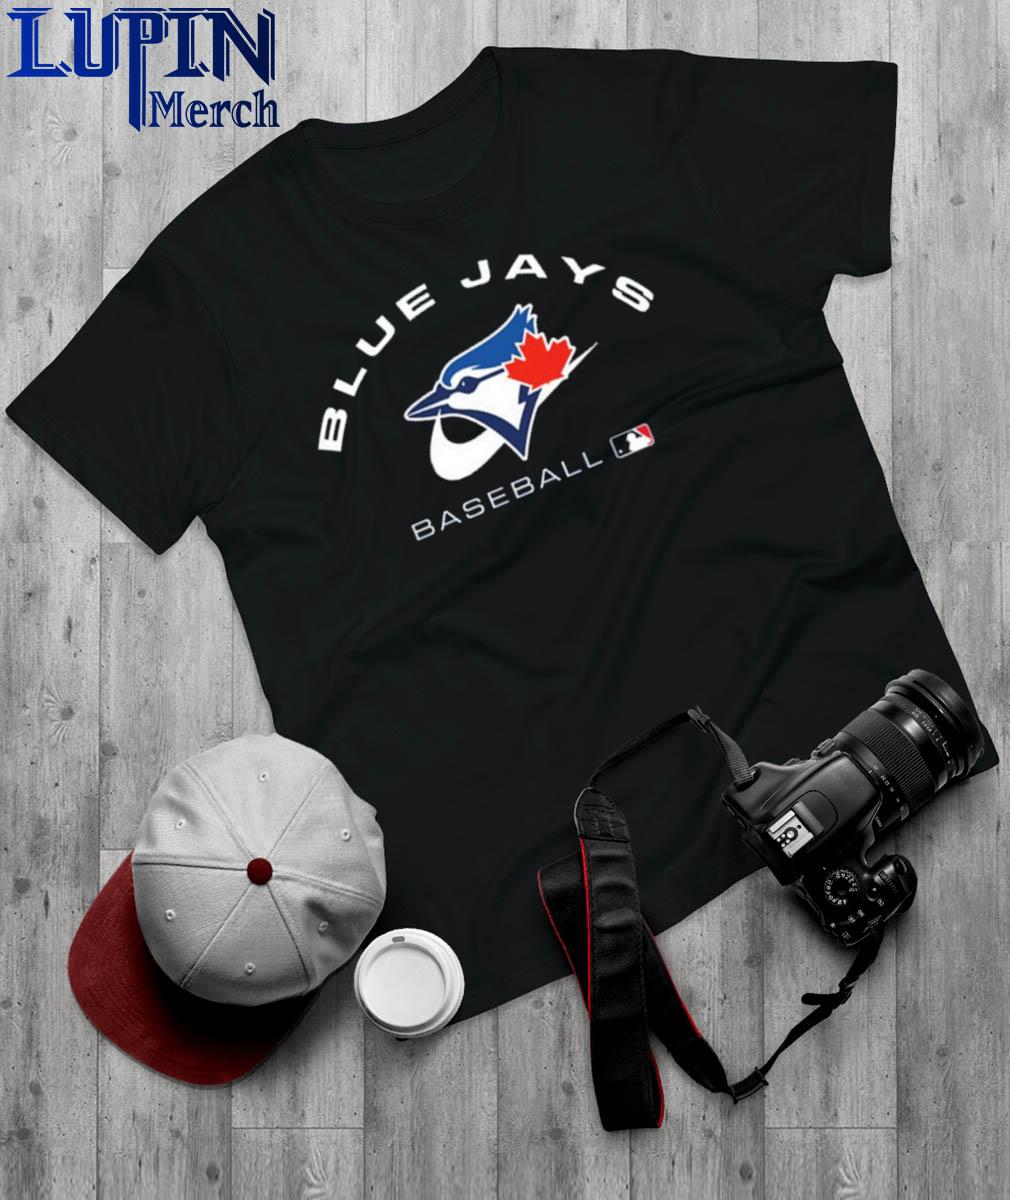 Blue Jays shirt, hoodie, sweater, long sleeve and tank top